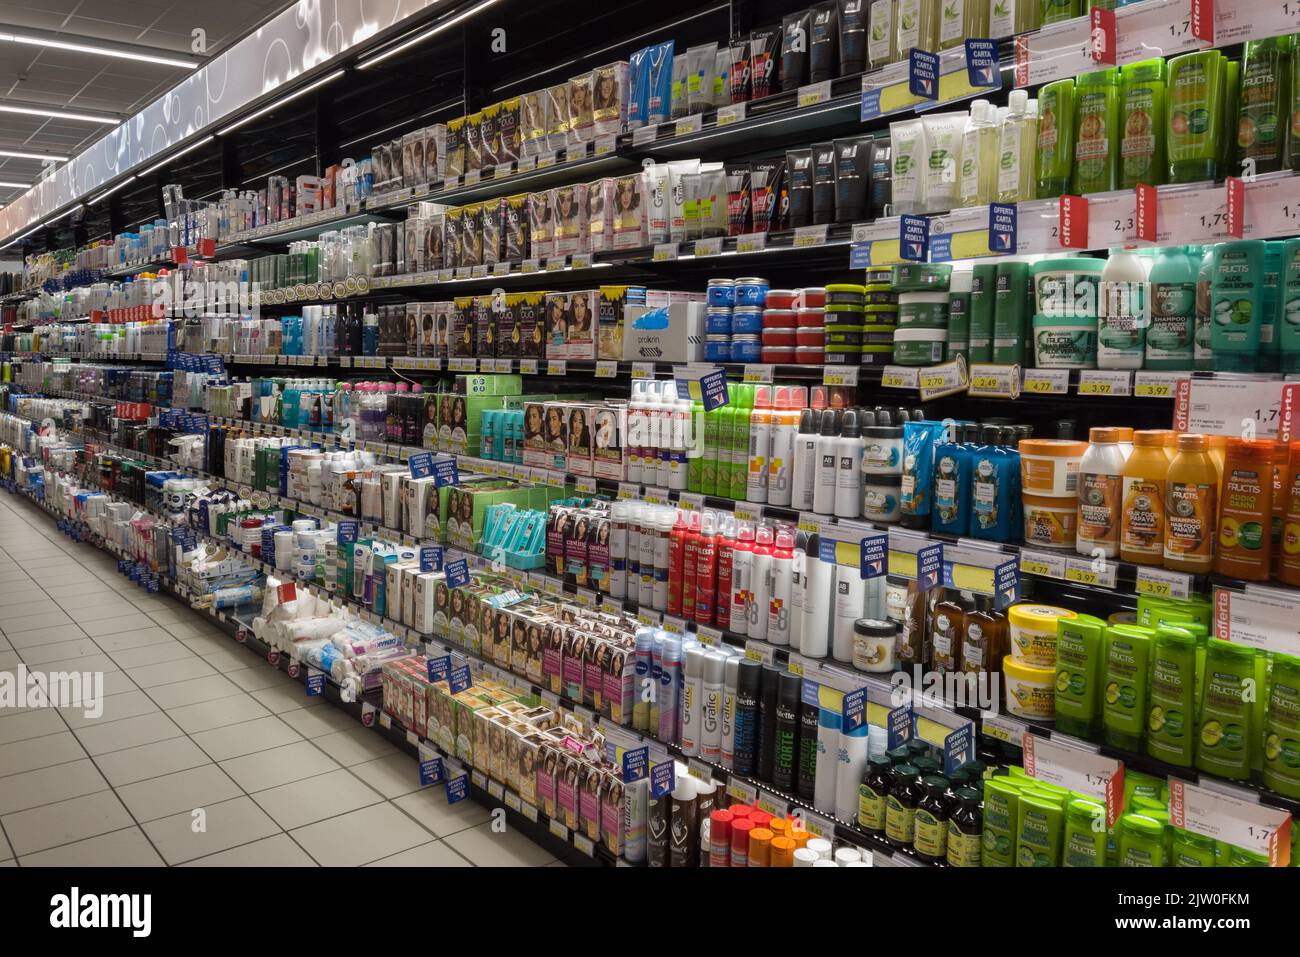 Fossano, Italy - August 11, 2022: Different brands and types of hair conditioner, body creams and cosmetics for sale on the shelf of Italian supermark Stock Photo